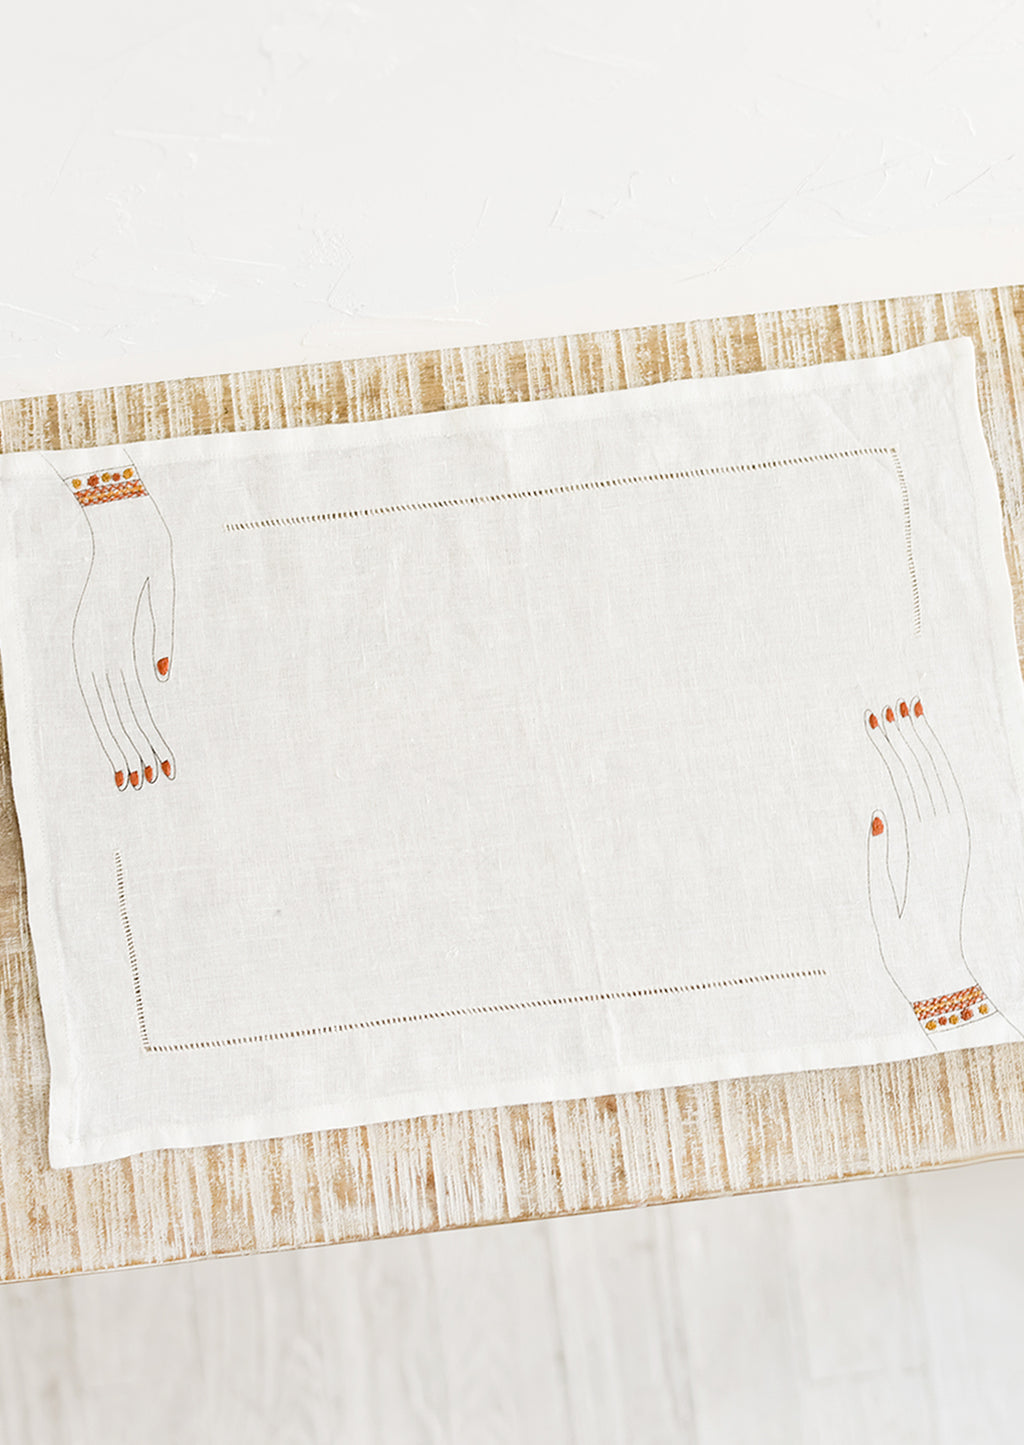 3: A white linen placemat with hemstitch border and embroidered hands at two corners.